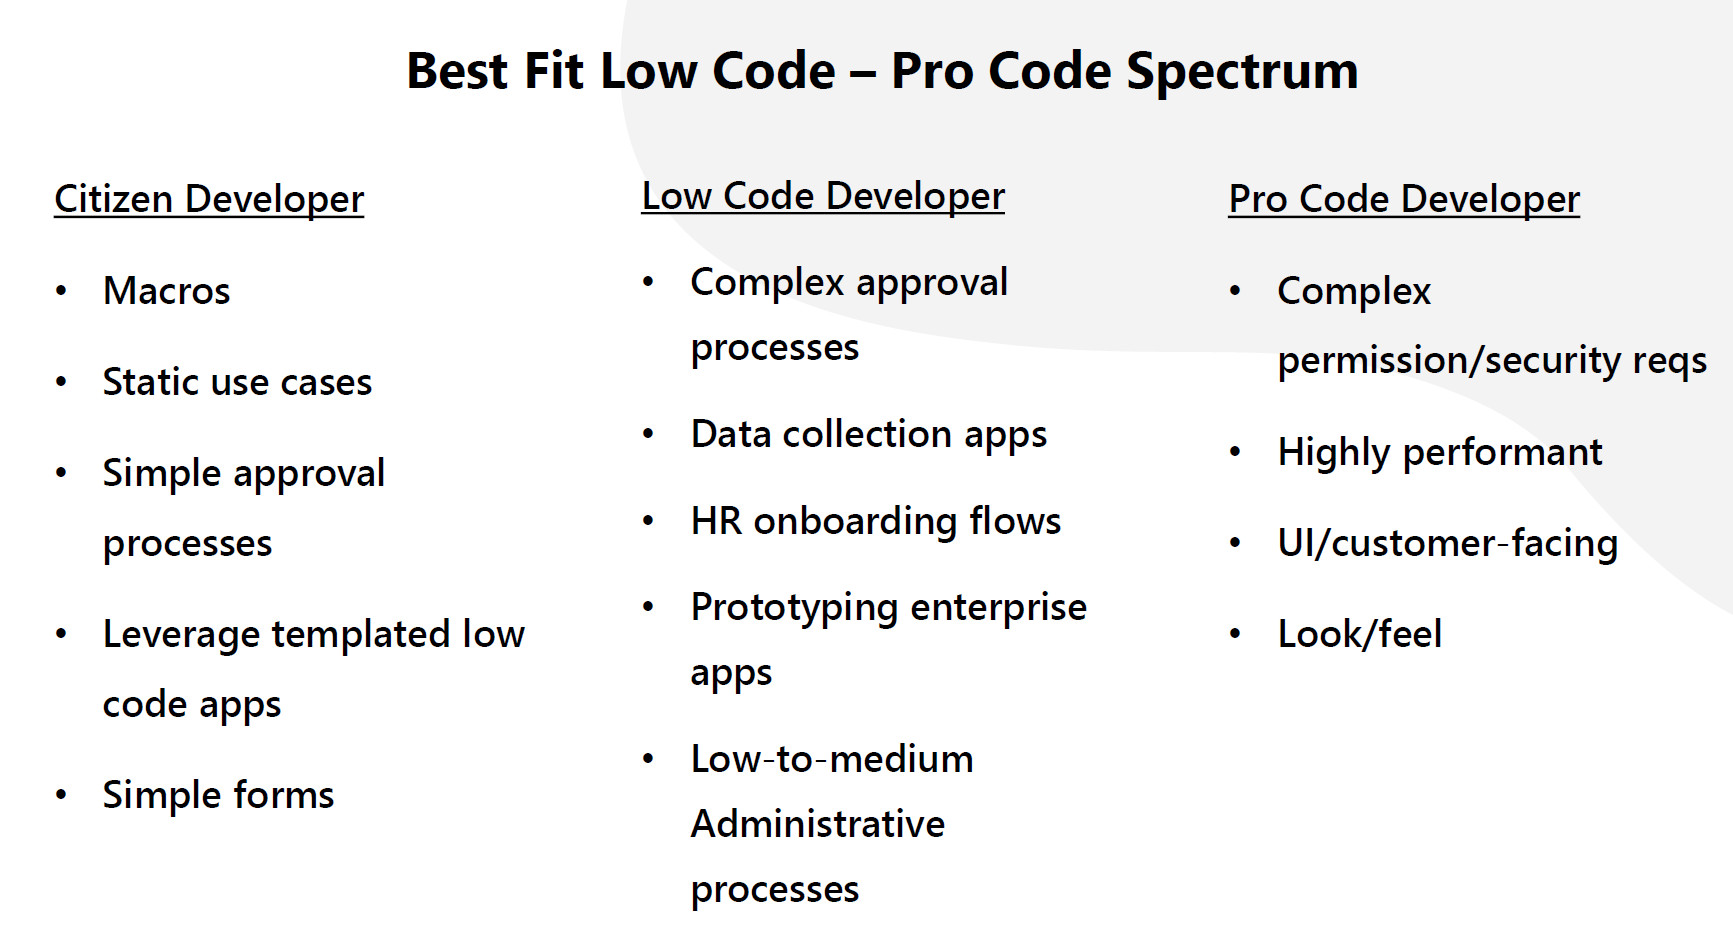 low code or pro code